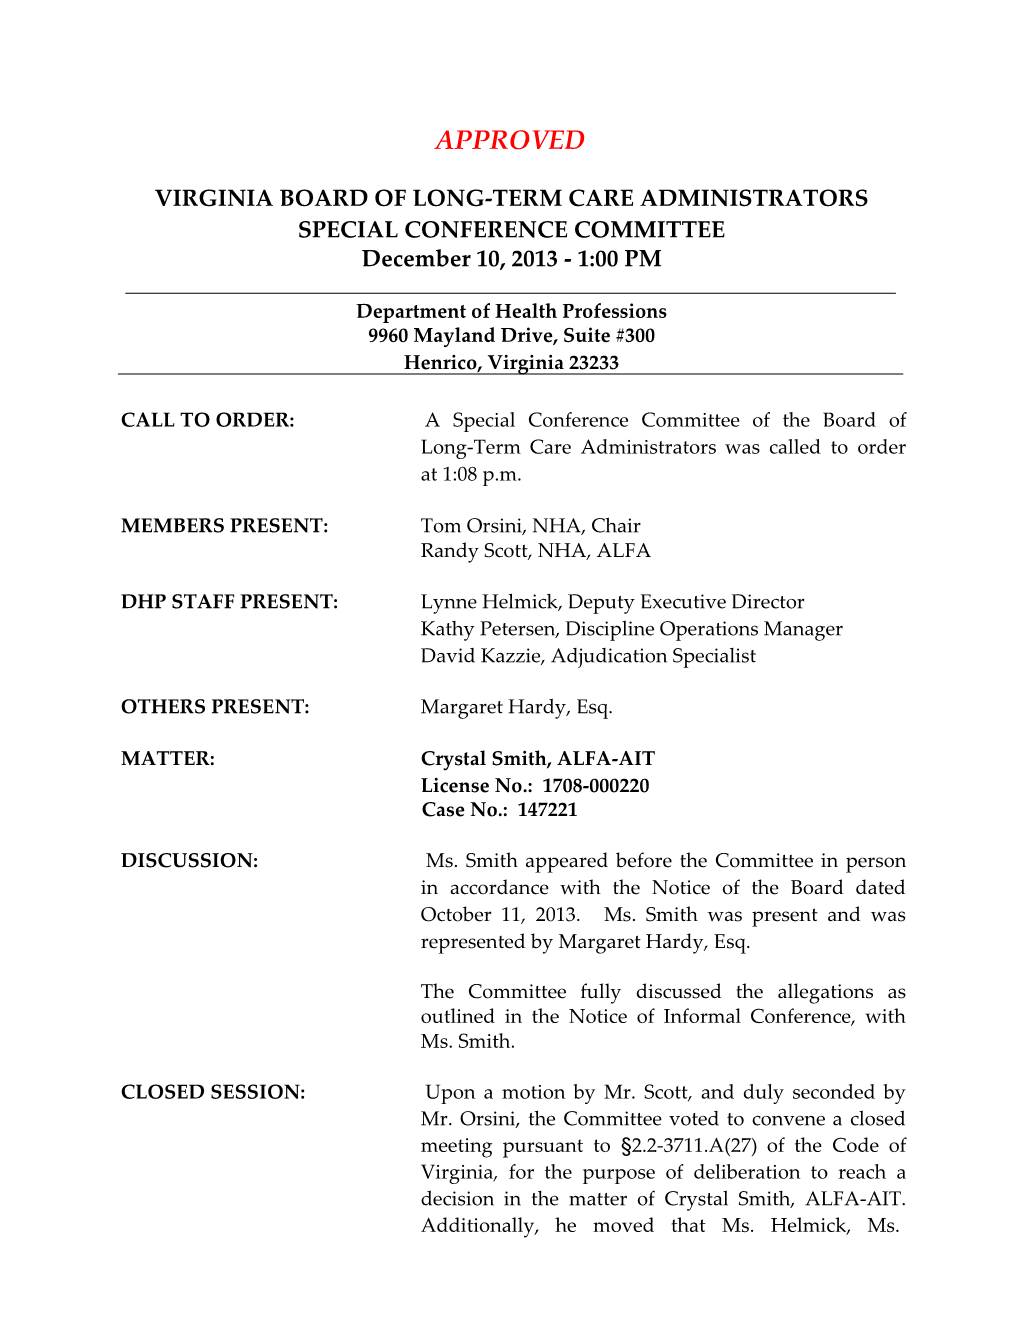 Virginia Board of Long-Term Care Administrators Special Conference Committee